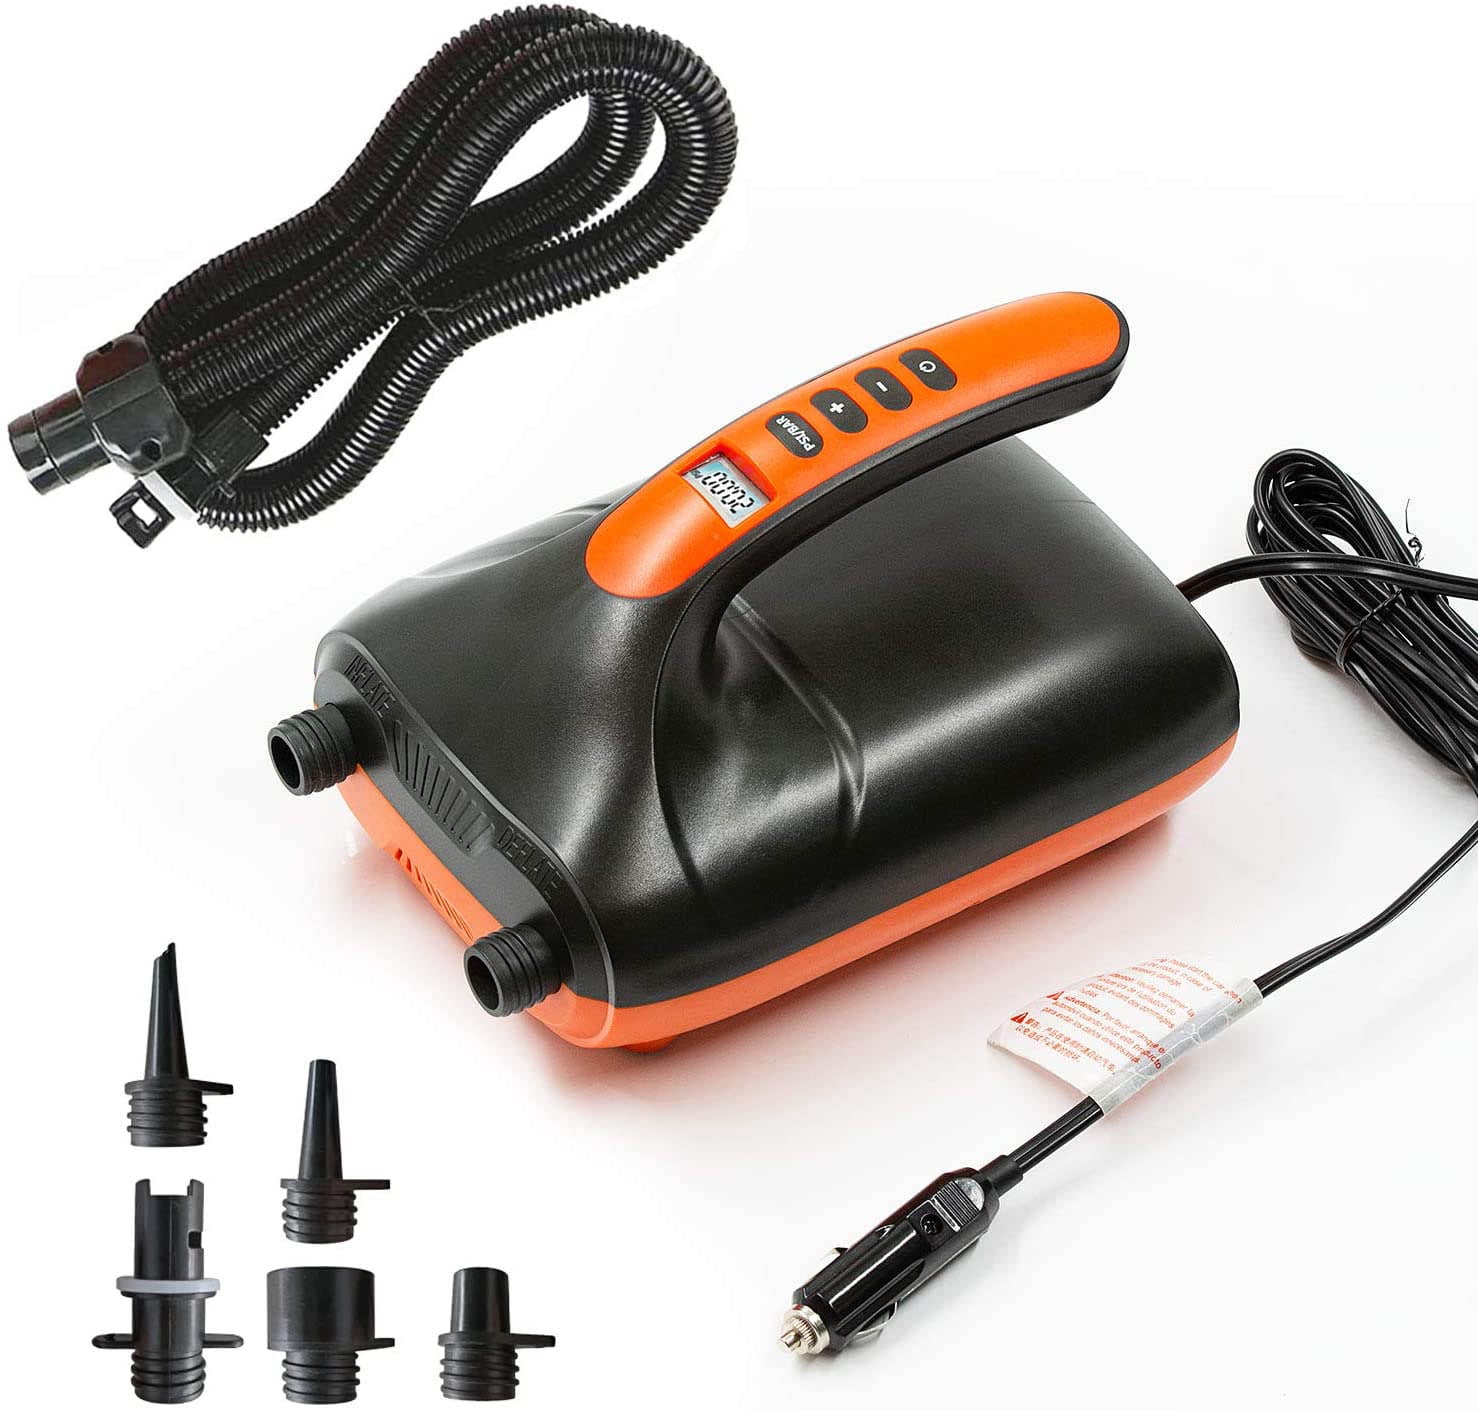 Portable Digital Air Pump 12V High Pressure Electric Inflatable for Air Pump SUP & Paddle Board with Digital LCD Screen